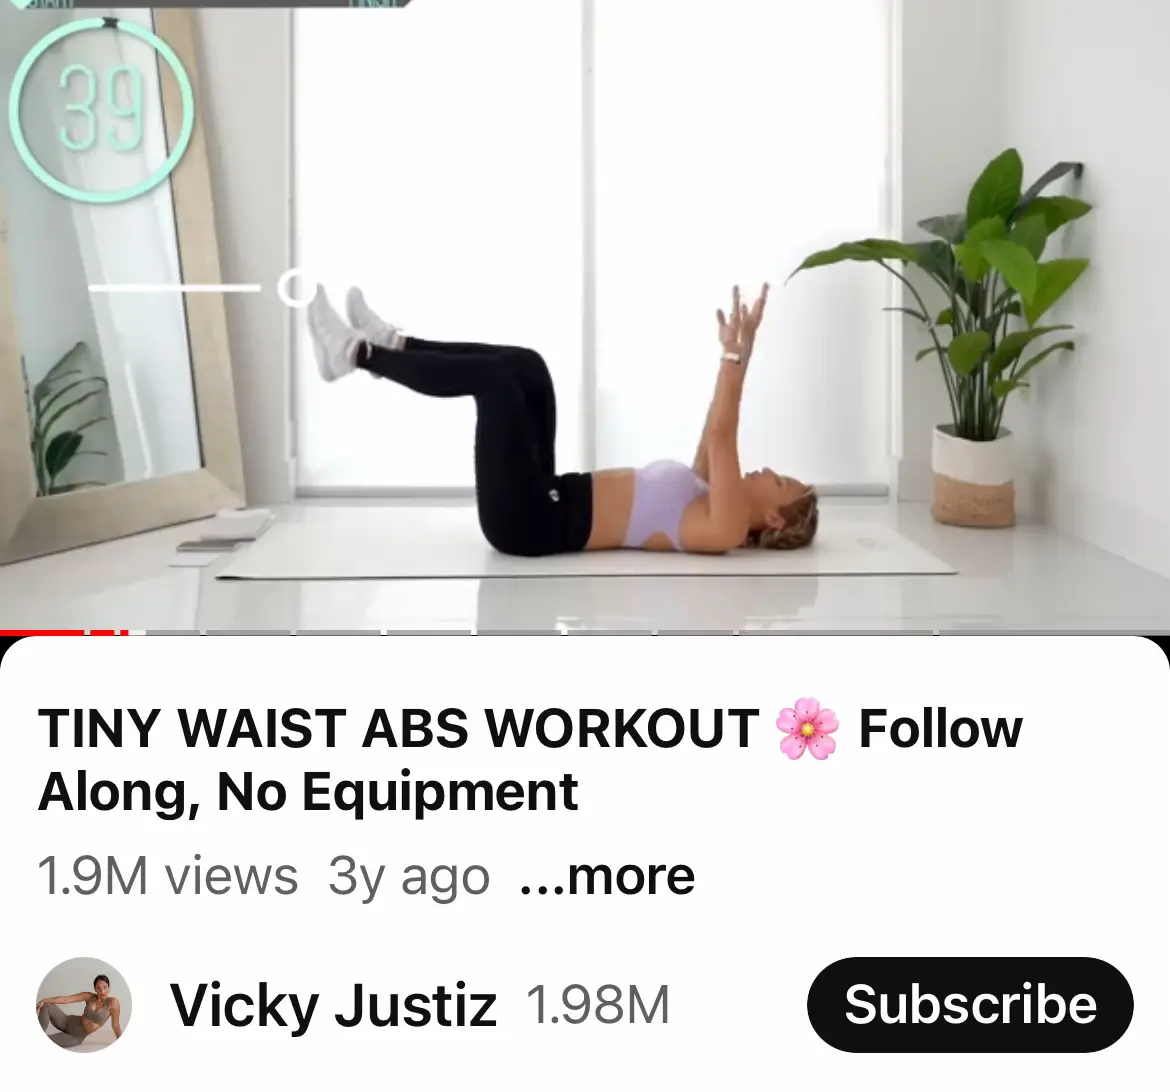 5 Minute ABS WORKOUT at Home  Caroline Girvan Fitness Channel – 2